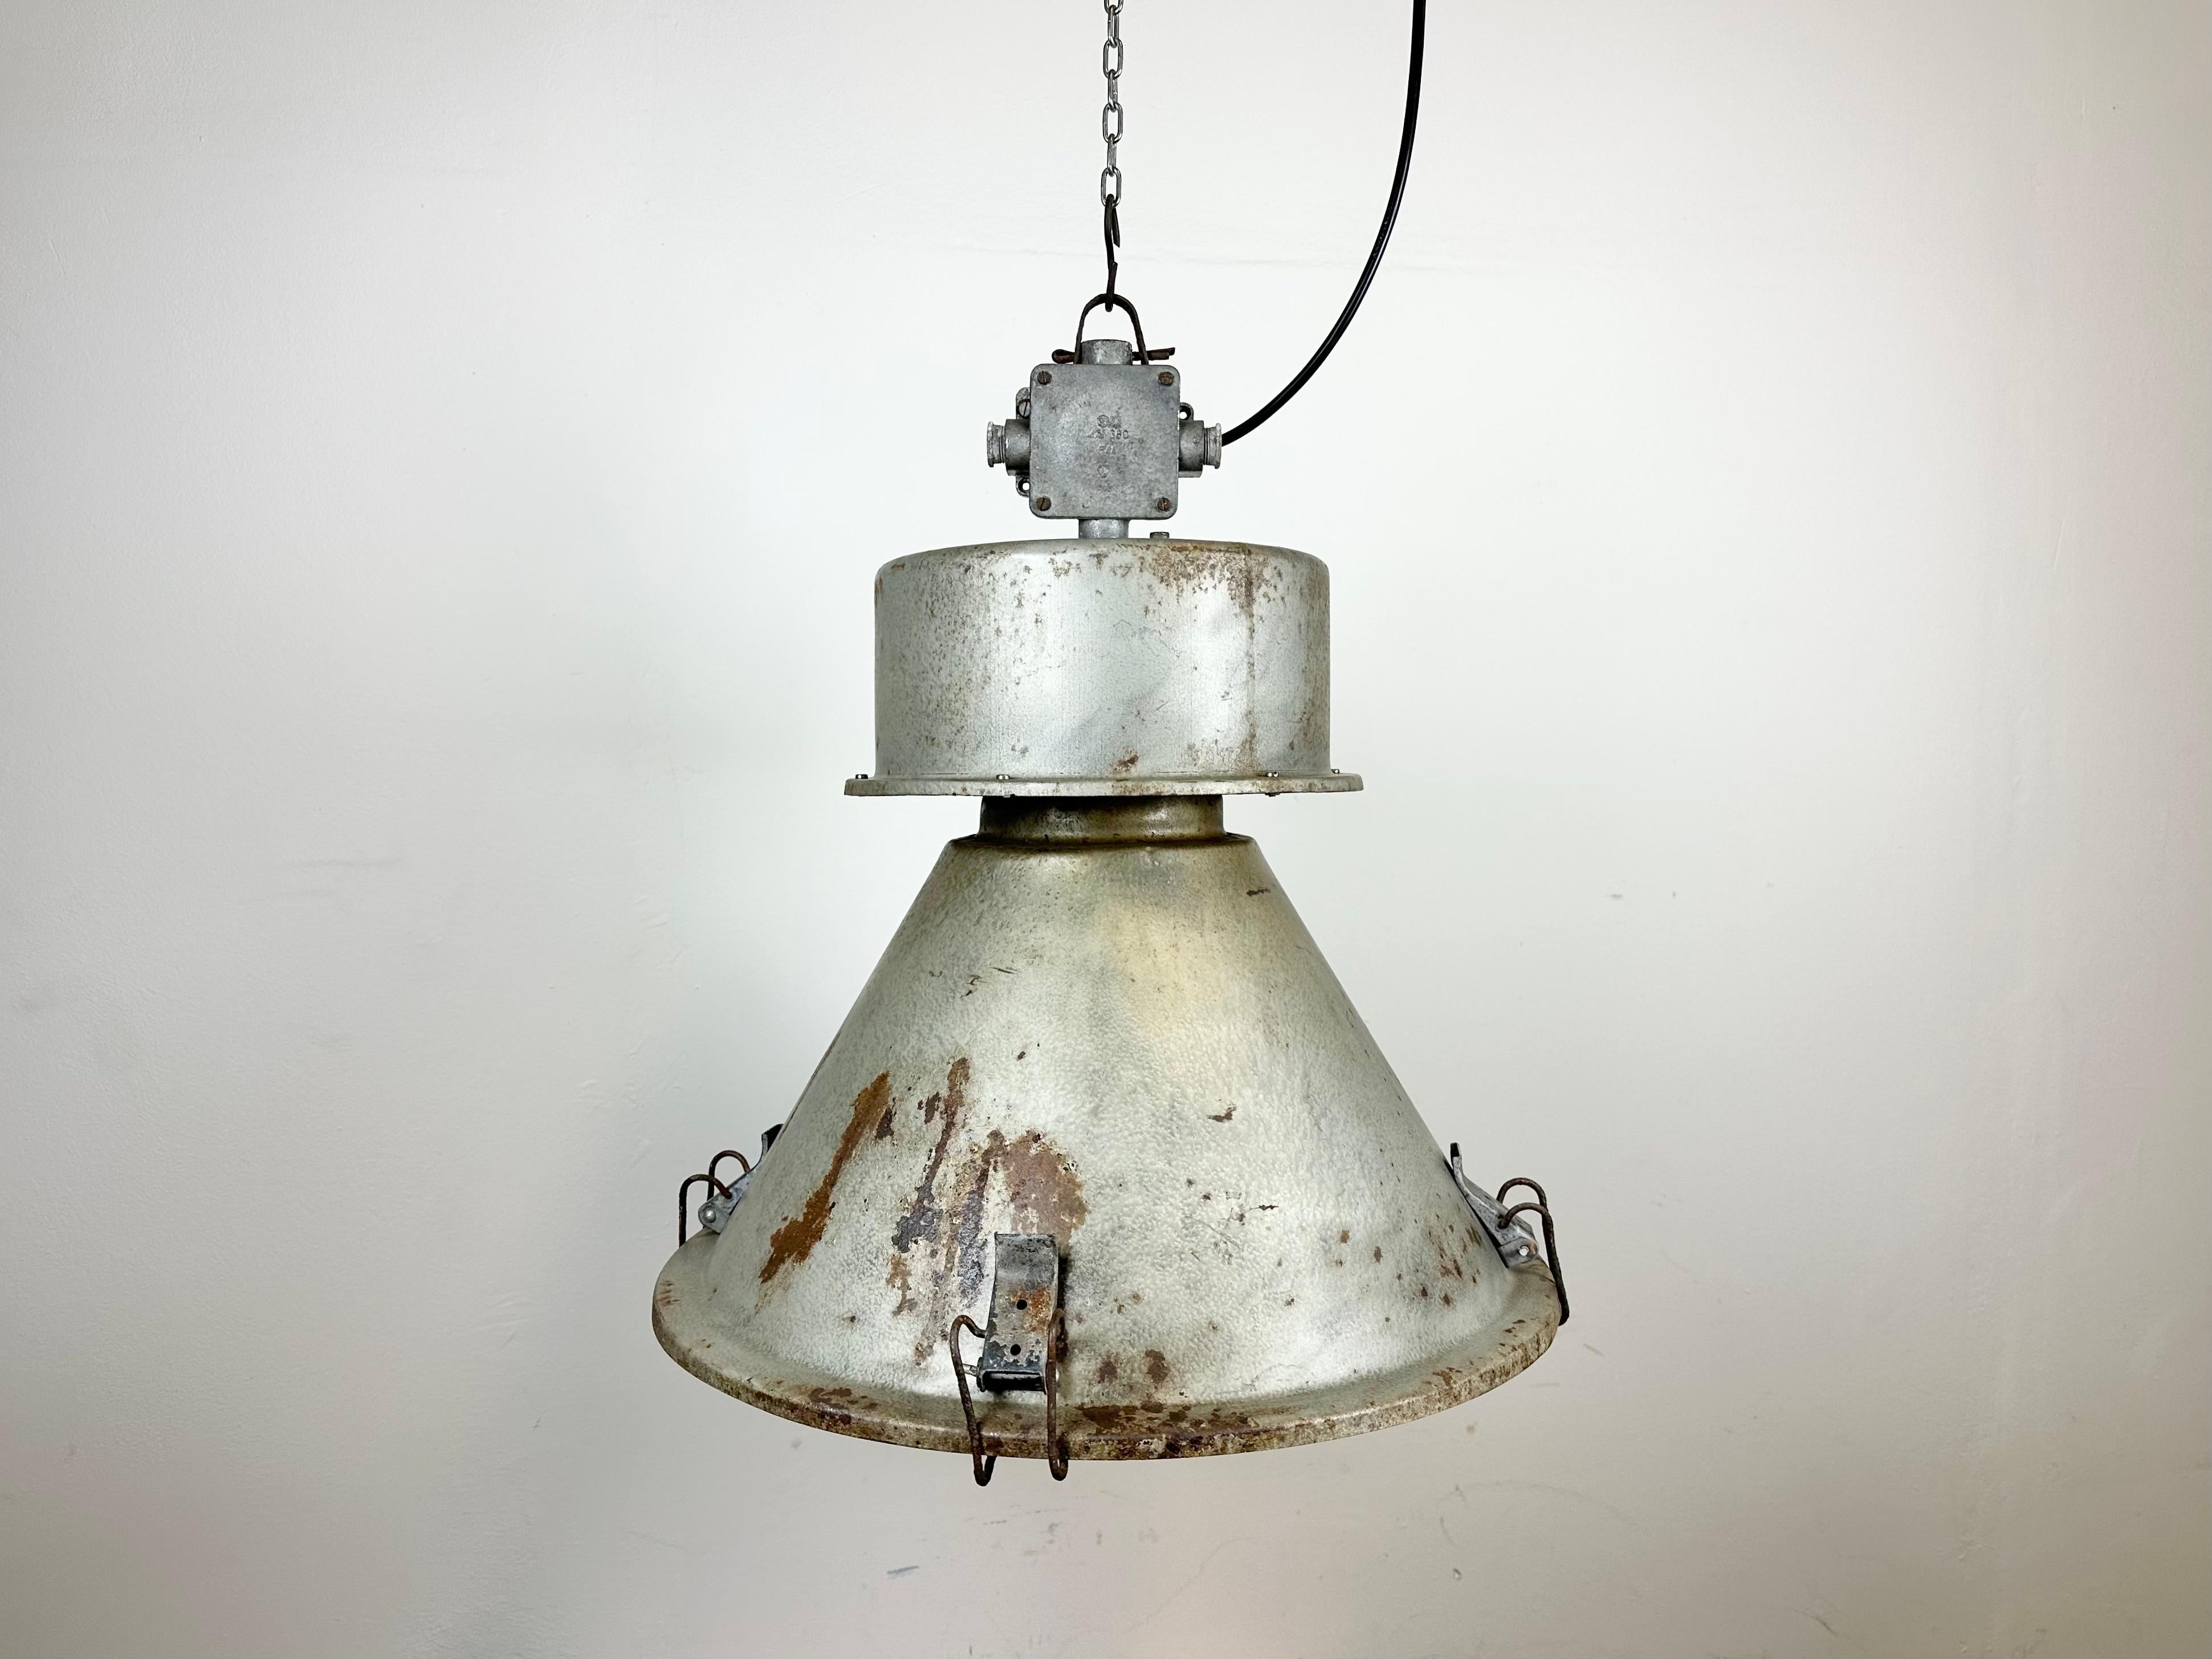 Vintage industrial hanging lamp manufactured in 1970s by MESKO in Skarzysko-Kamienna in Poland. It features a grey iron body and cast aluminium top. The porcelain socket requires E 27/ E26 light bulbs. New wire. The weight of the lamp is 5 kg.